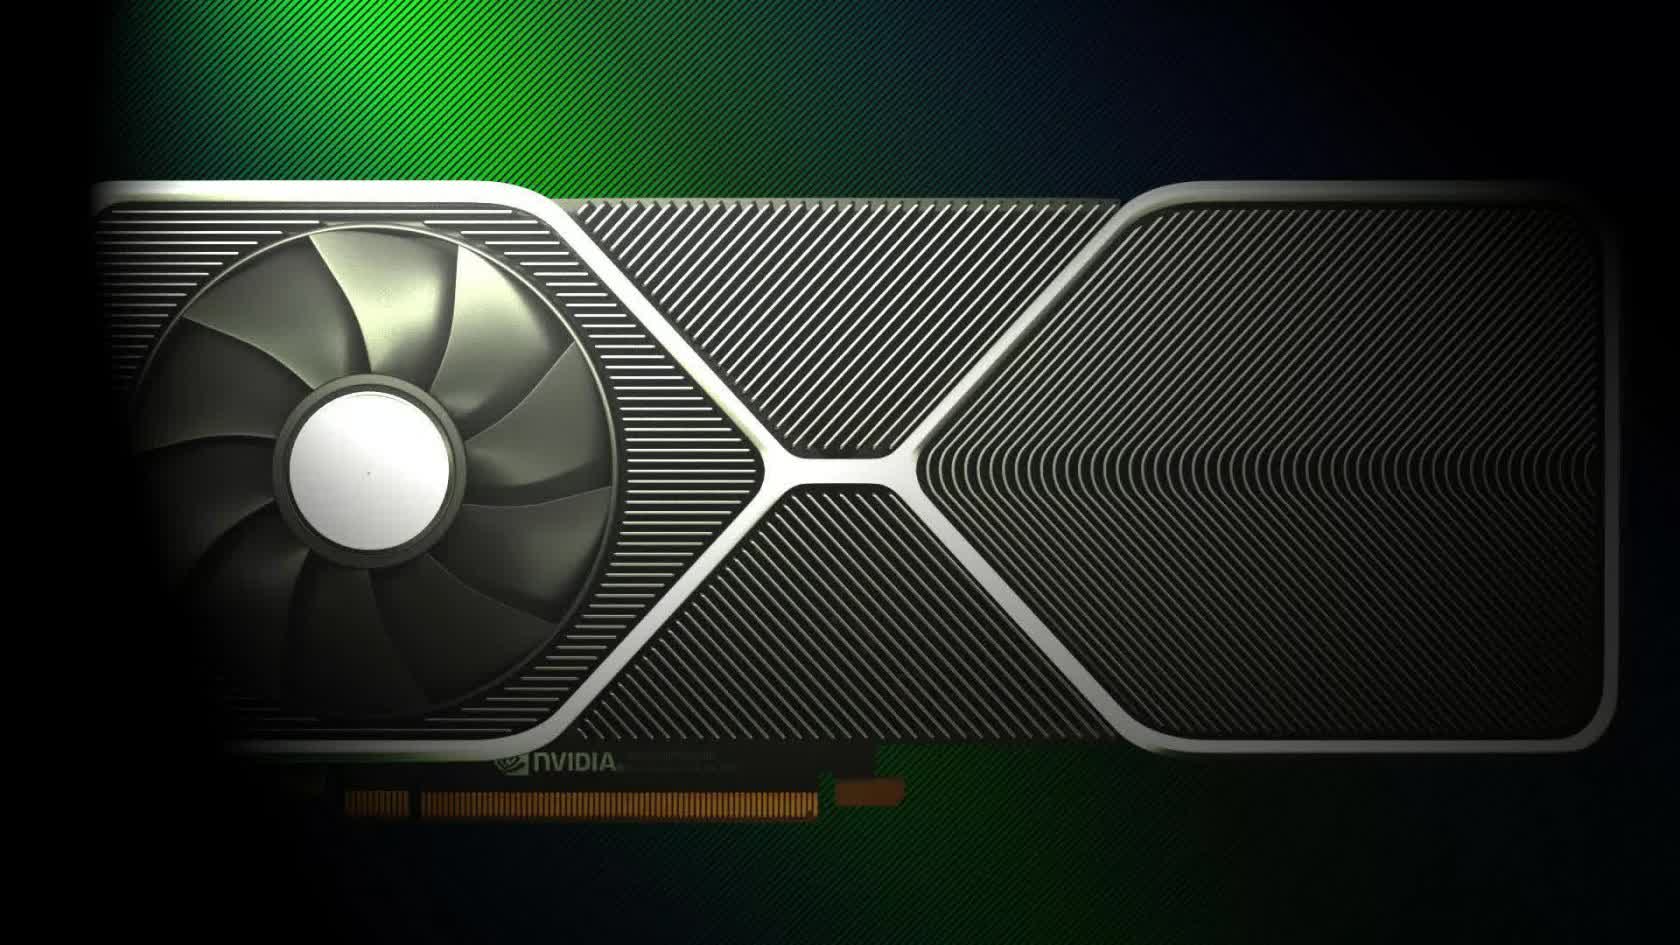  What are the release dates for the Nvidia 3070, 3080, and 3090 GPUs? 